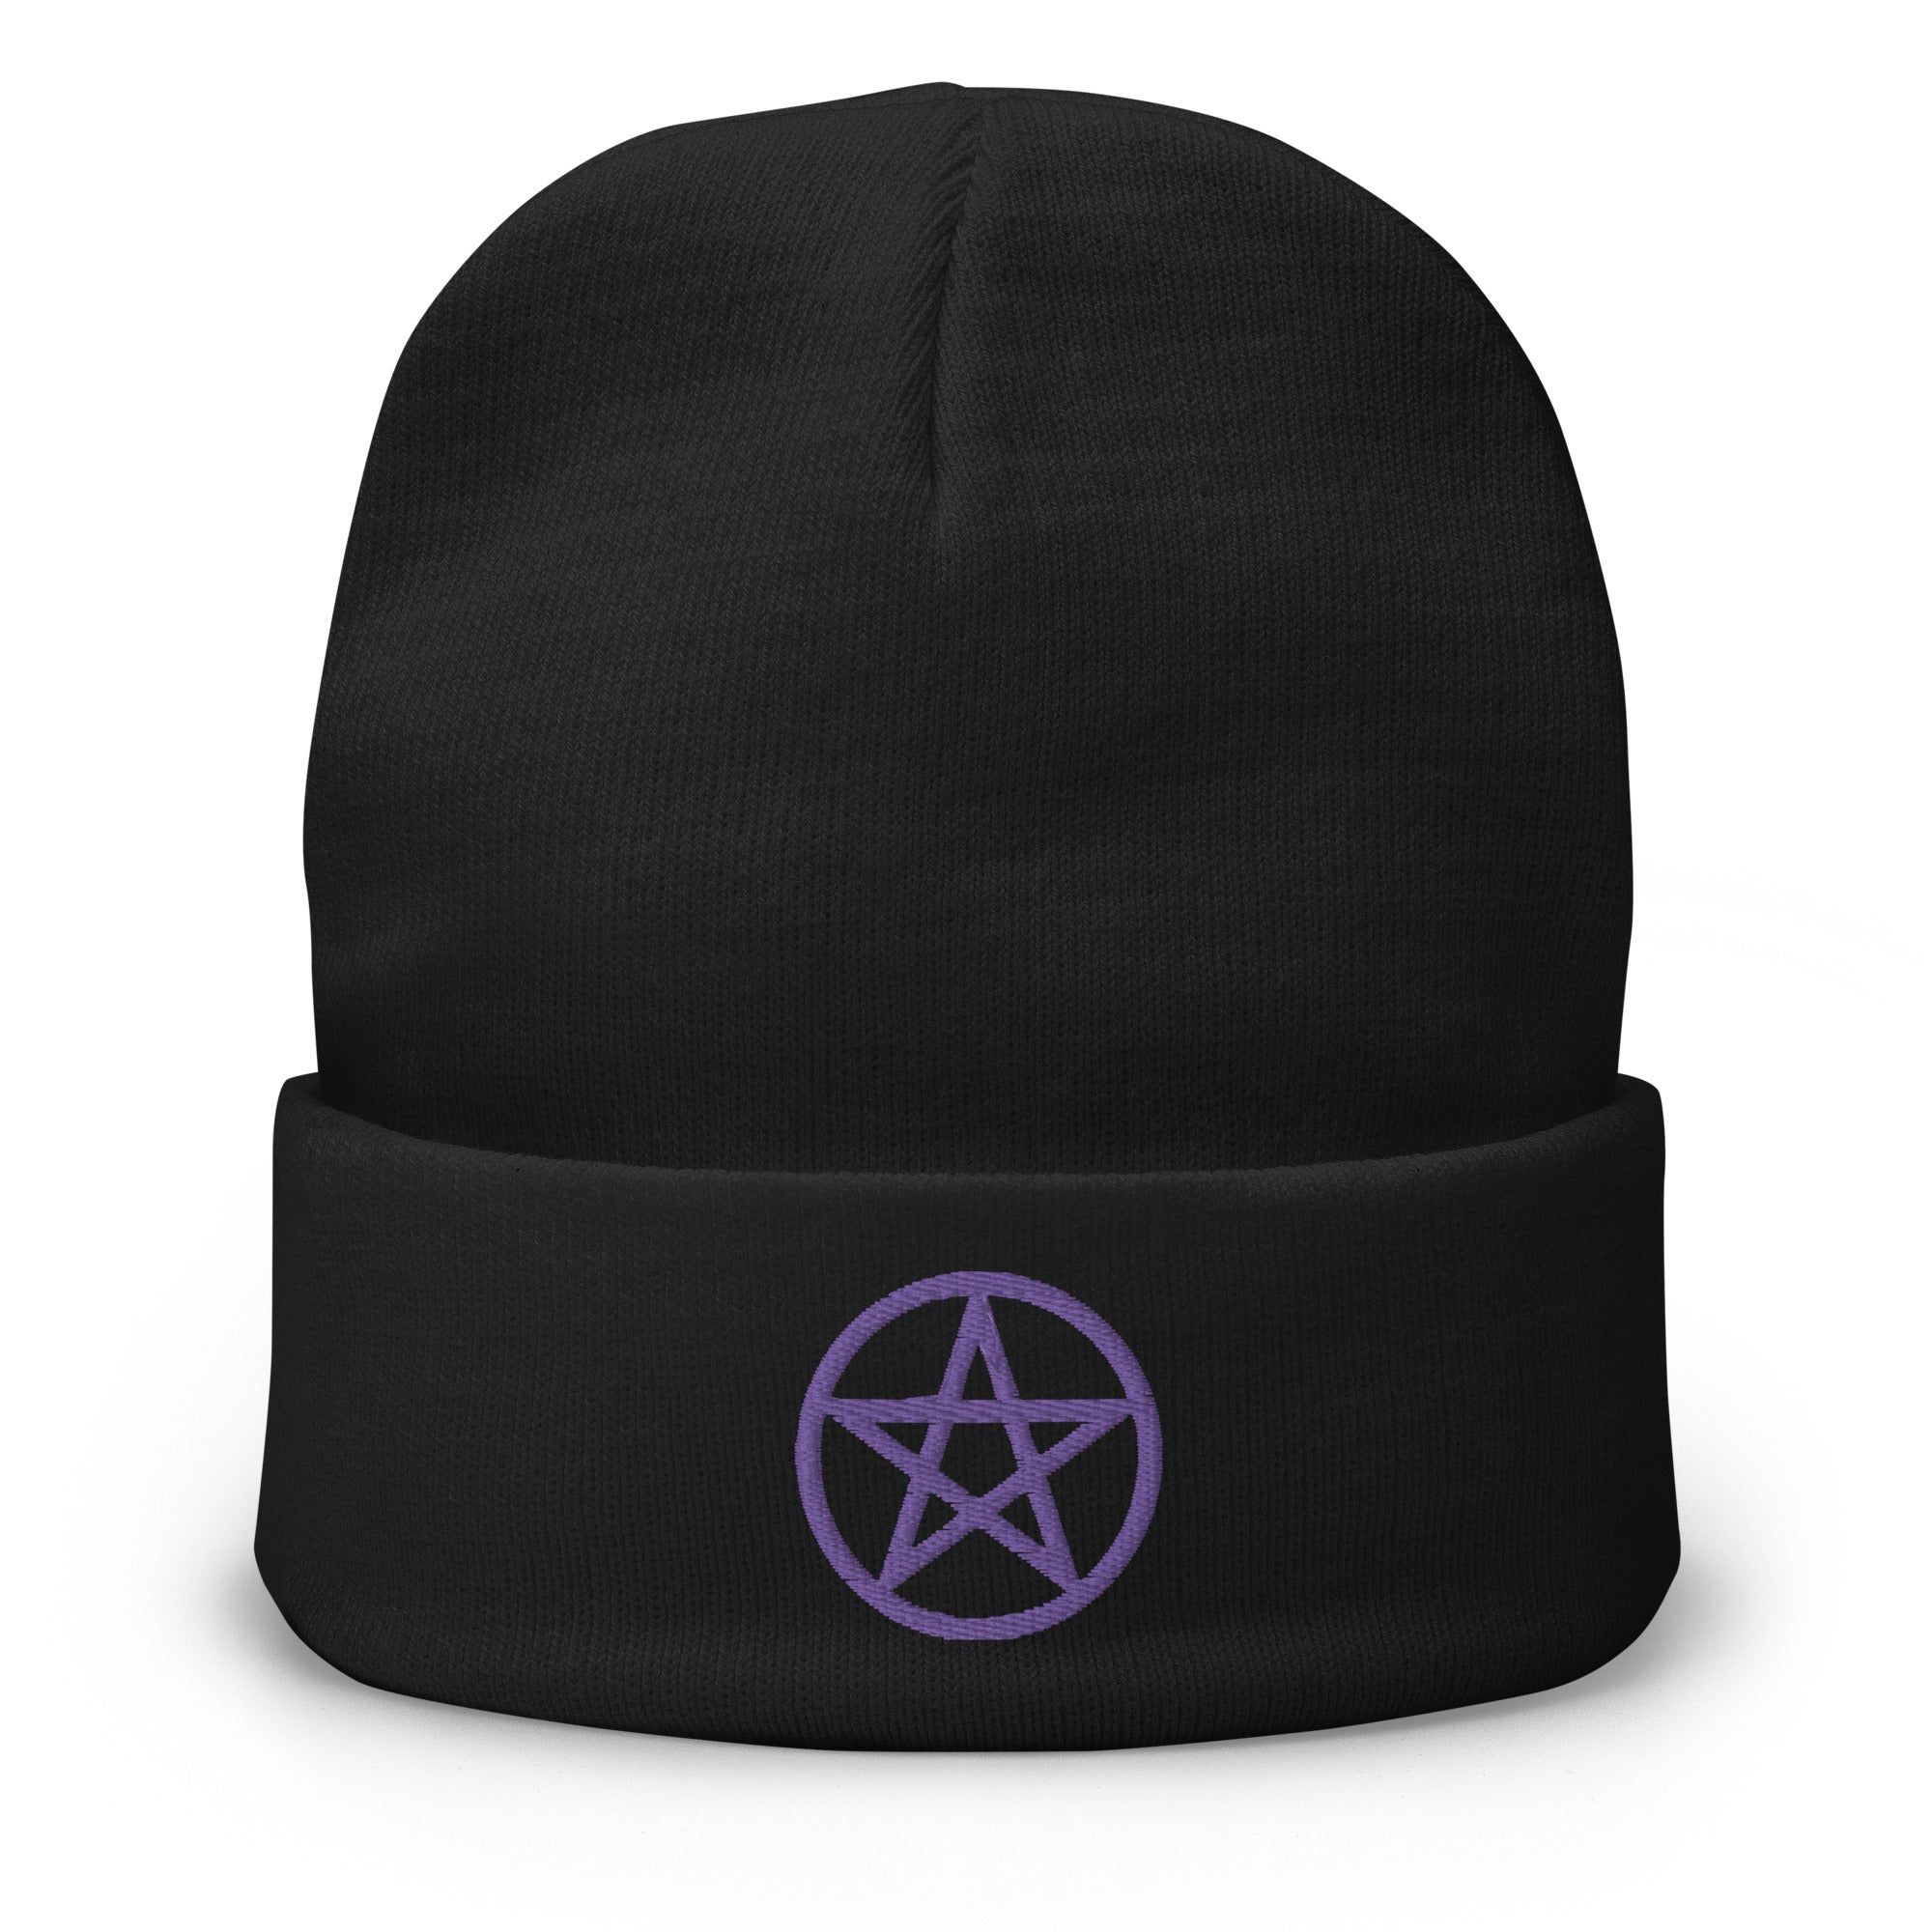 Wiccan Witchcraft Pentagram Embroidered Cuff Beanie Pagan Ritual - Edge of Life Designs